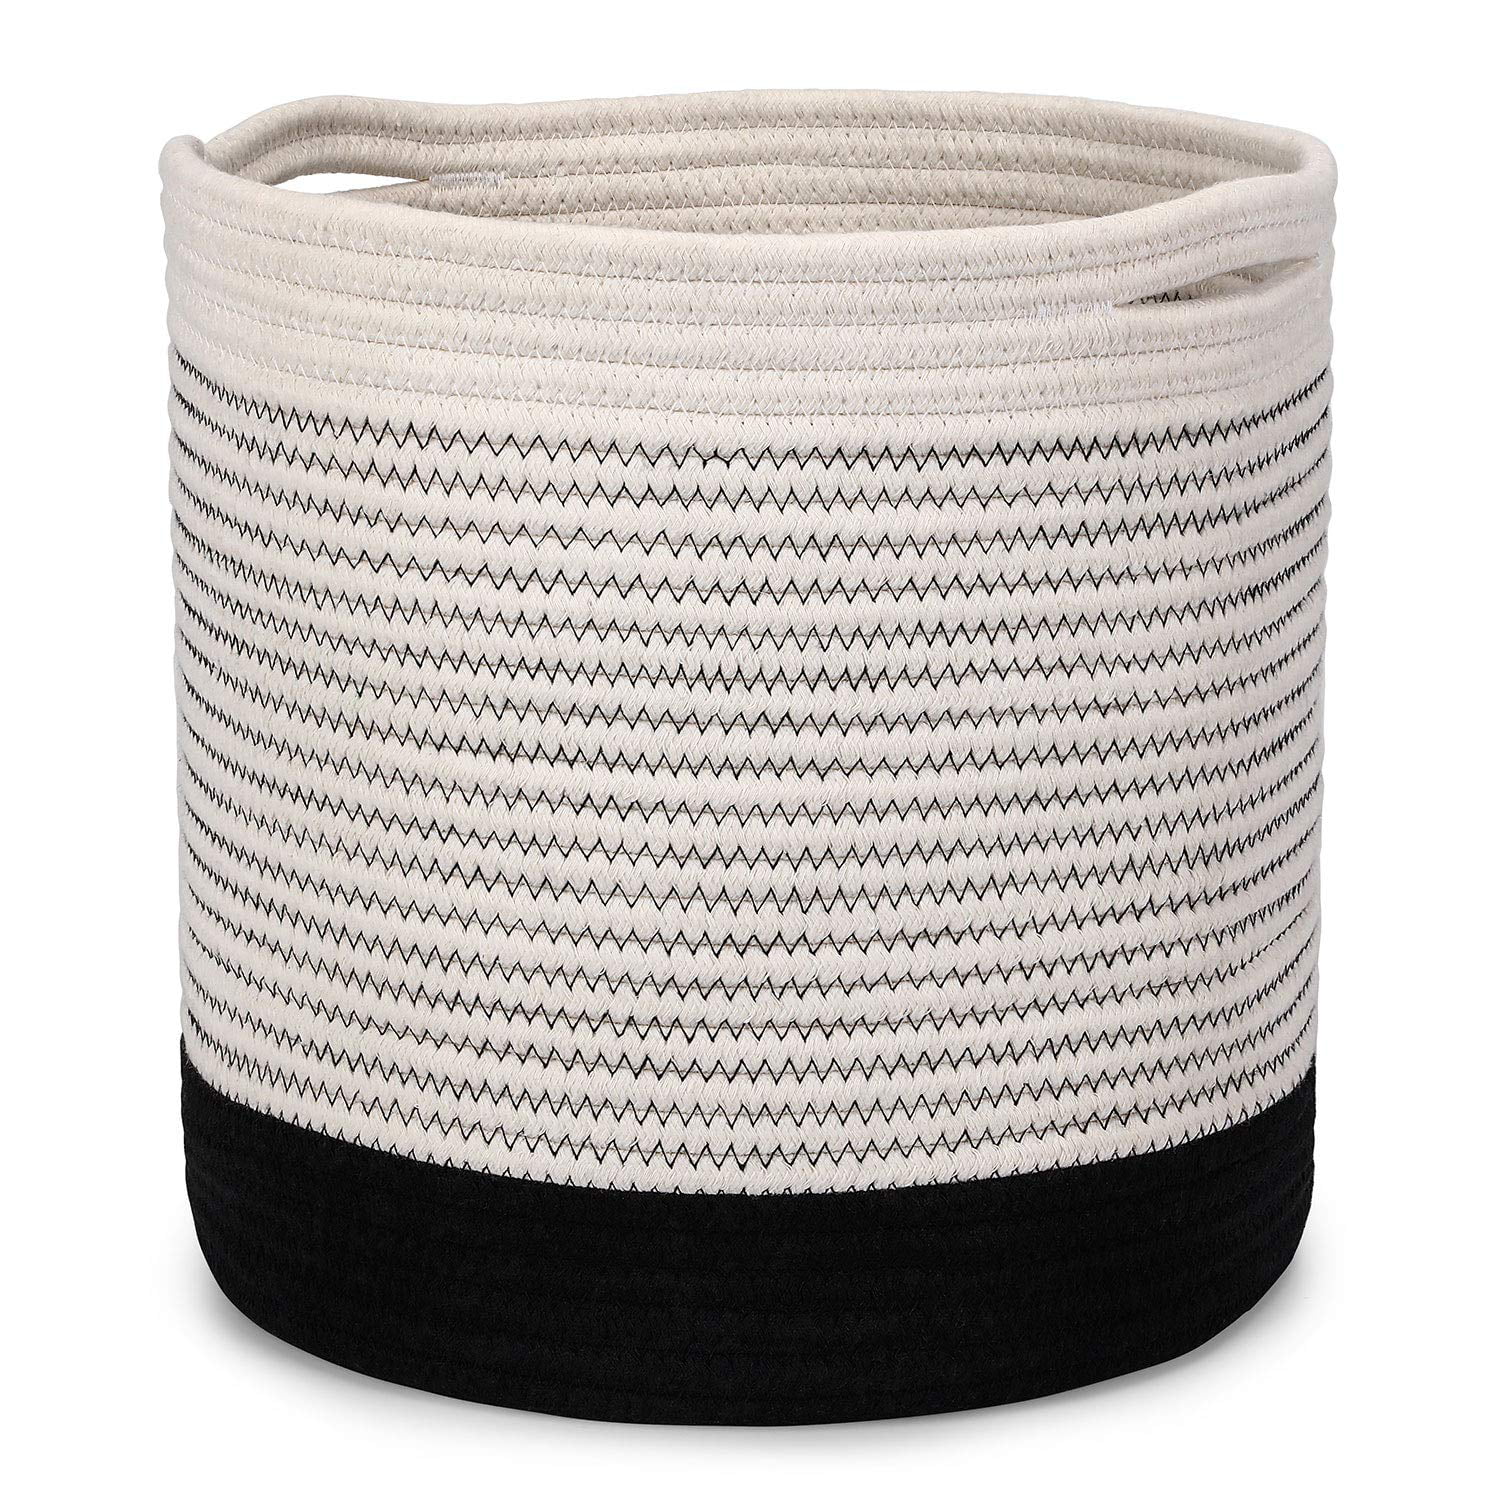 White and Black Stitching POTEY 700202 Cotton Woven Rope Plant Basket Modern Indoor Decorative Pot Up to 11 Inch Large Planters Woven Storage Organizer with Handles Home Decor 12 x 12 